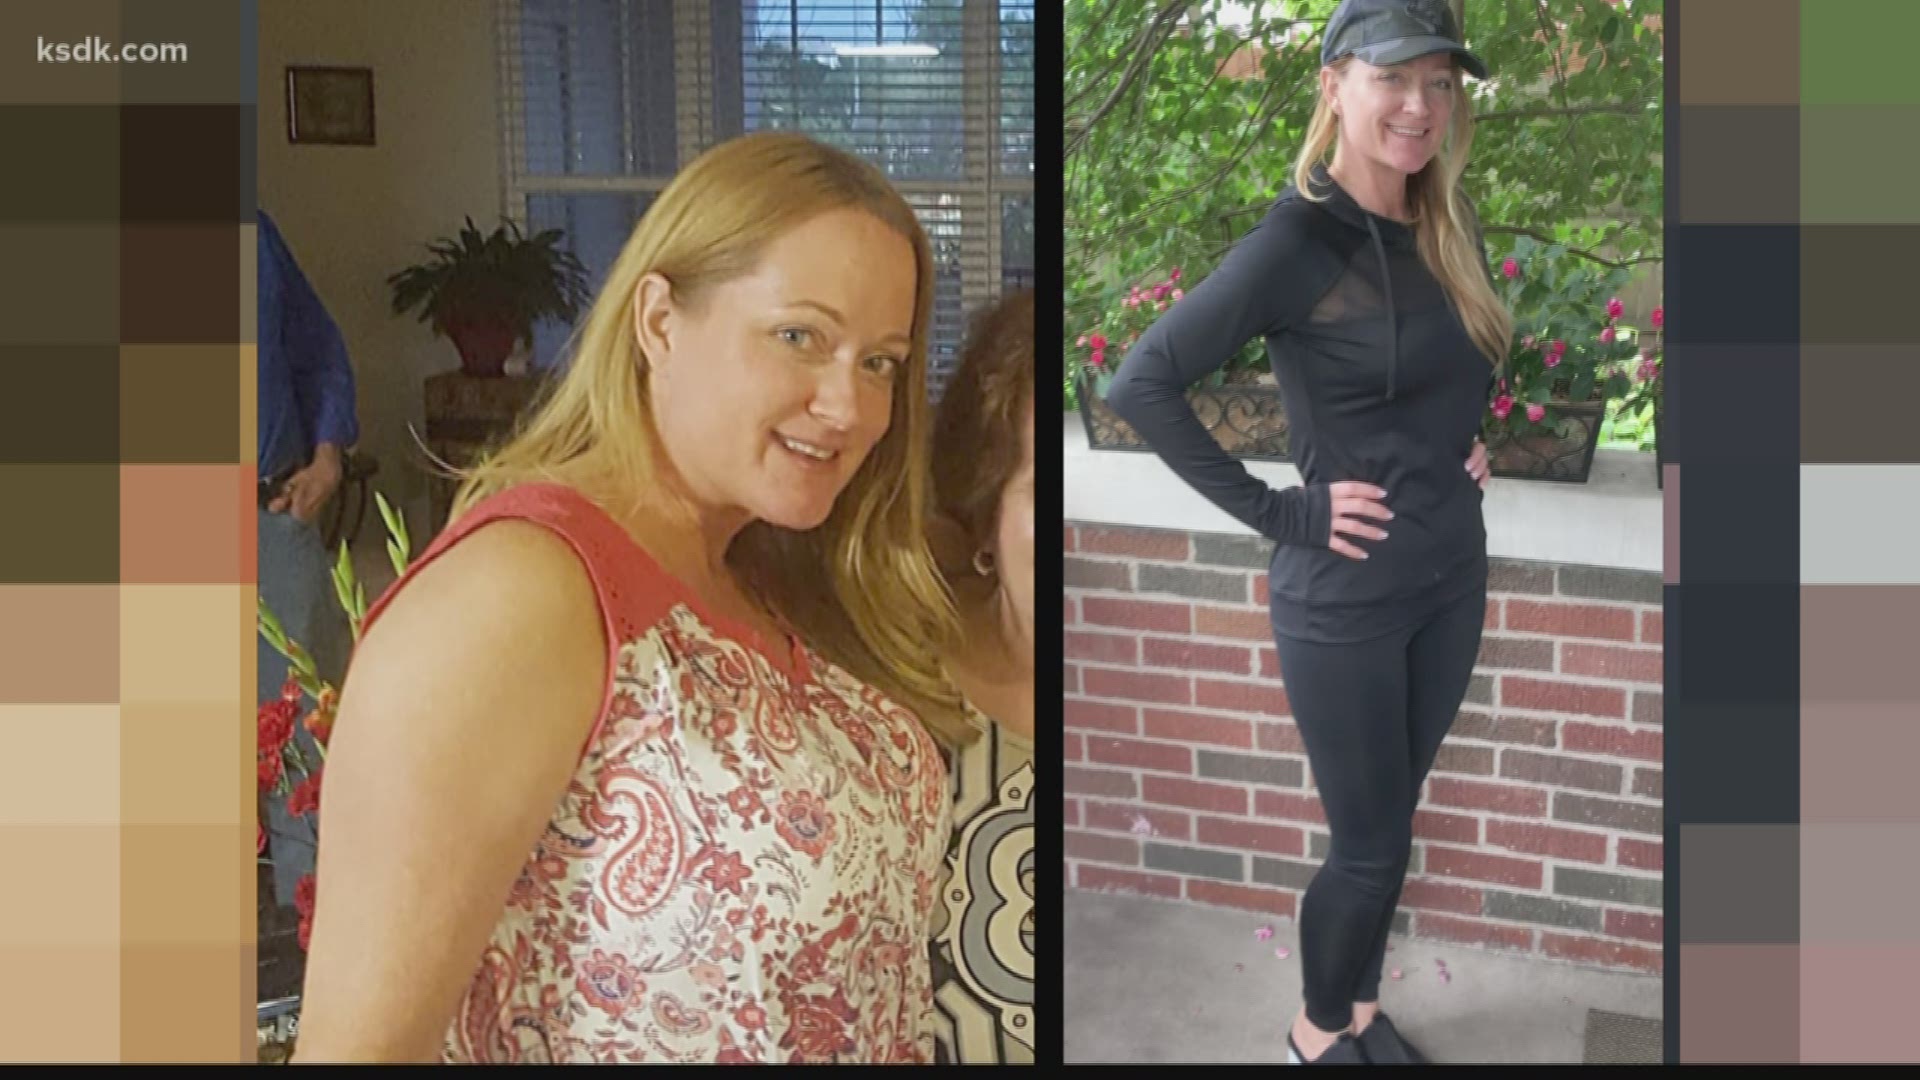 Shelly Rone lost 35 pounds working with Charles.